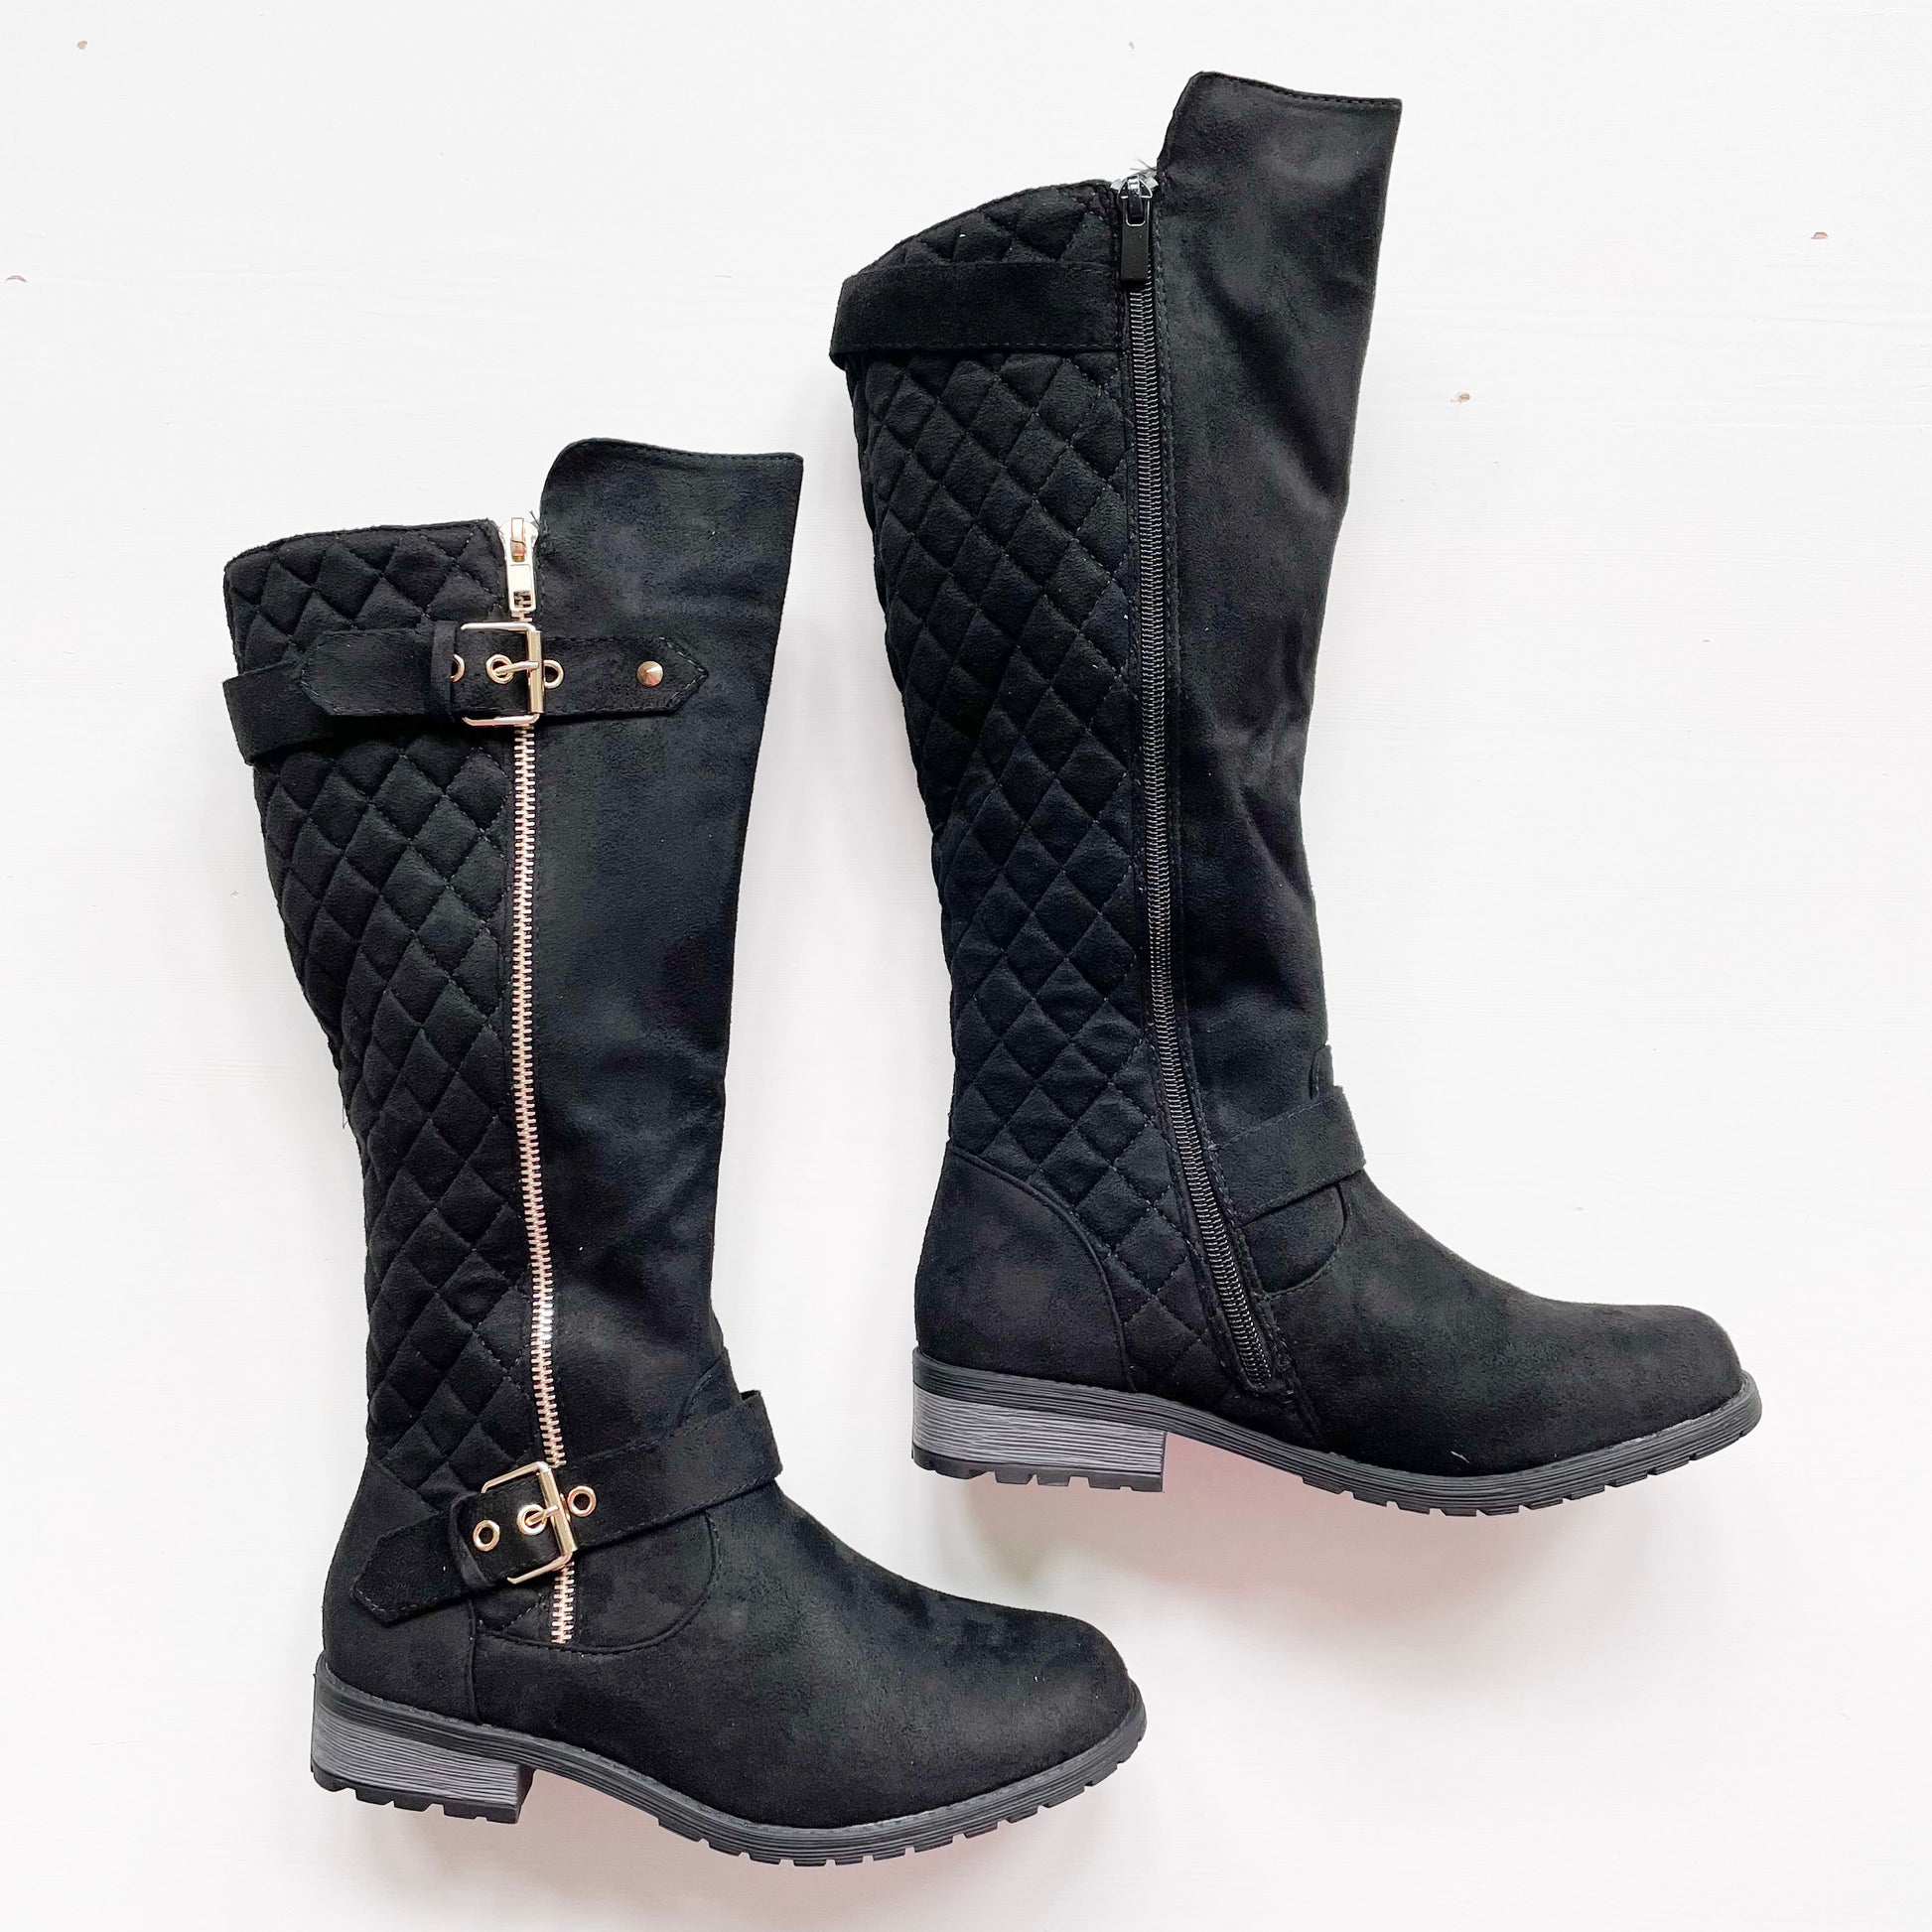 forever mango-23 black suede quilted boots with gold color zipper